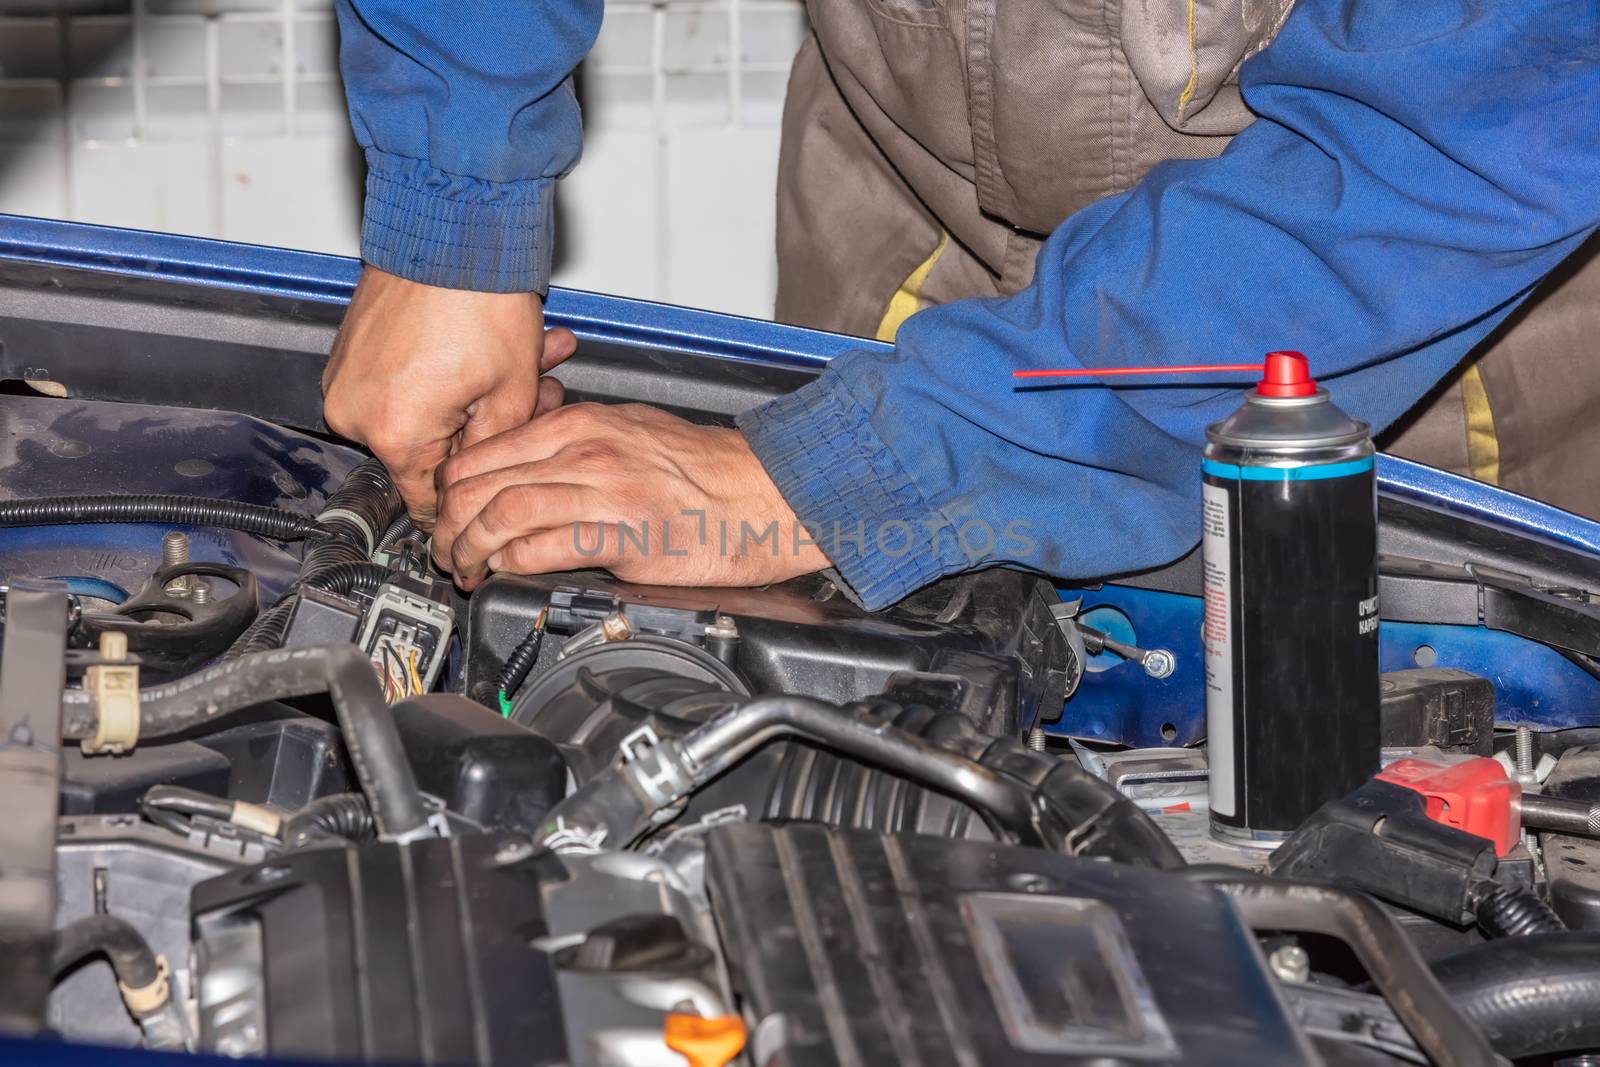 Repairman Working with dirty hands and uniform fixing car engine at service shop. Mechanic man hands repair and overhaul car engine. Mechanic wearing blue uniform